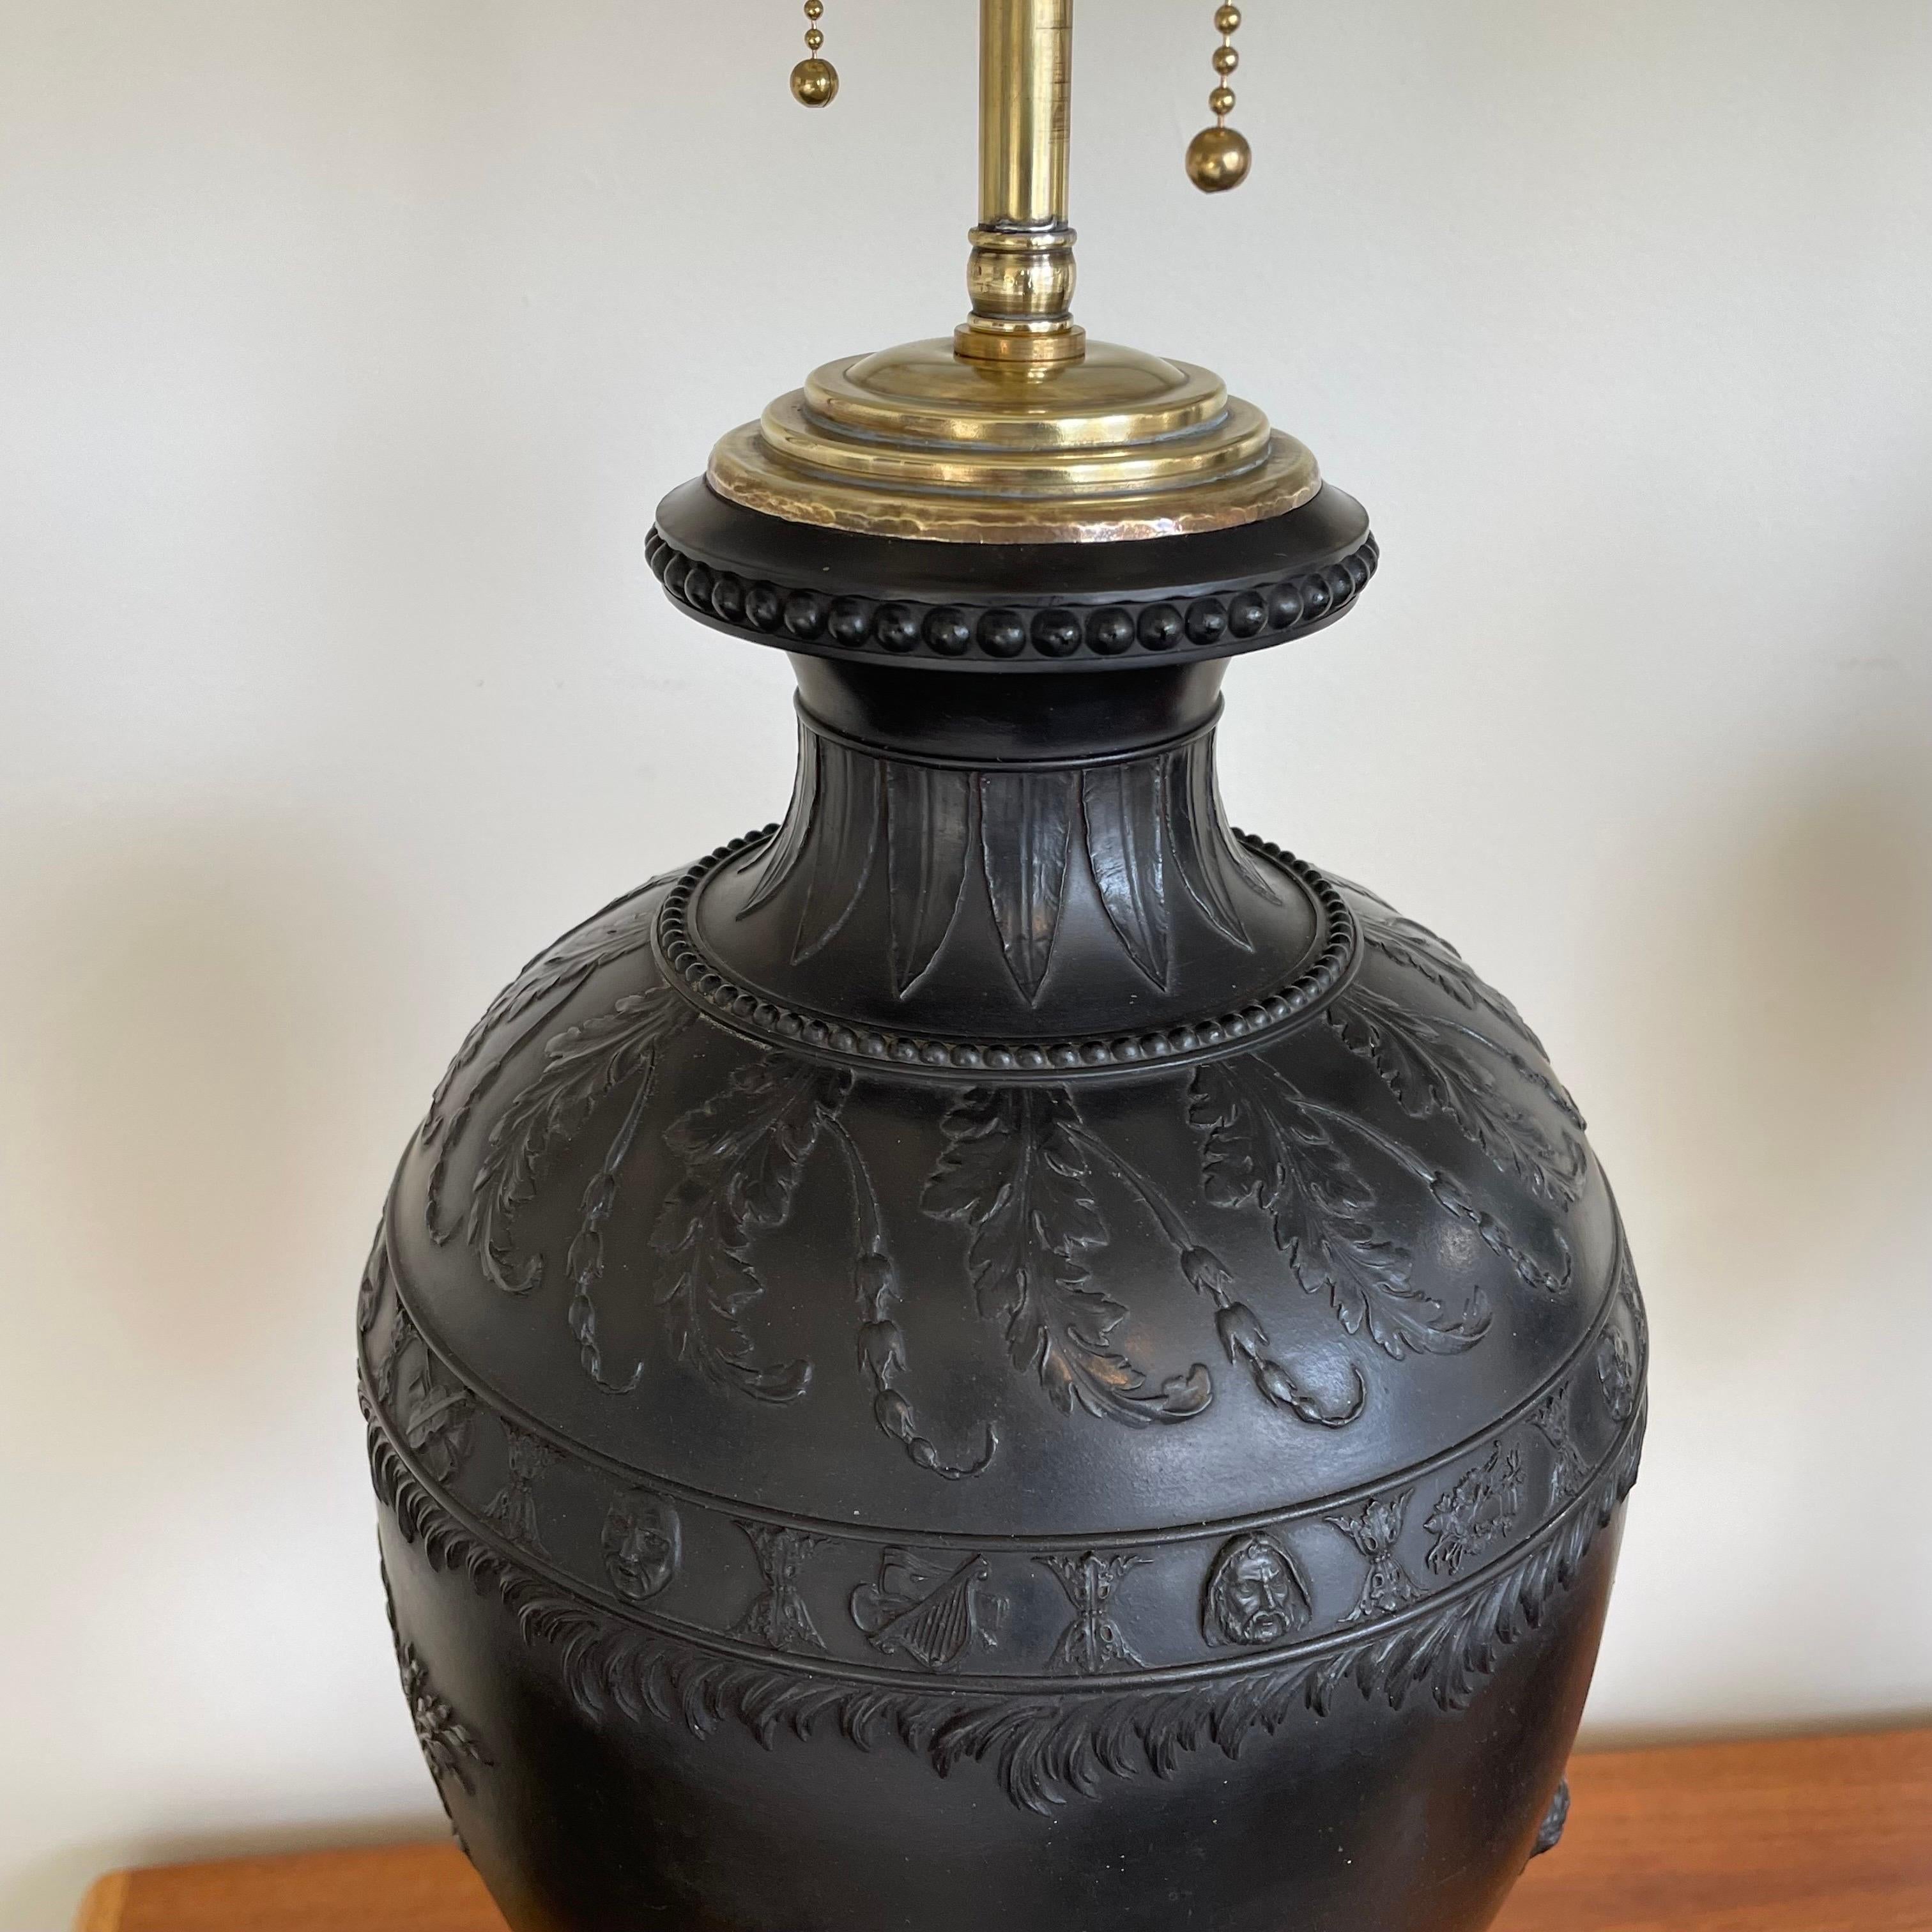 Stoneware Monumental Pair of Black Basalt Table Lamps by Wedgwood, Late 19th Century For Sale